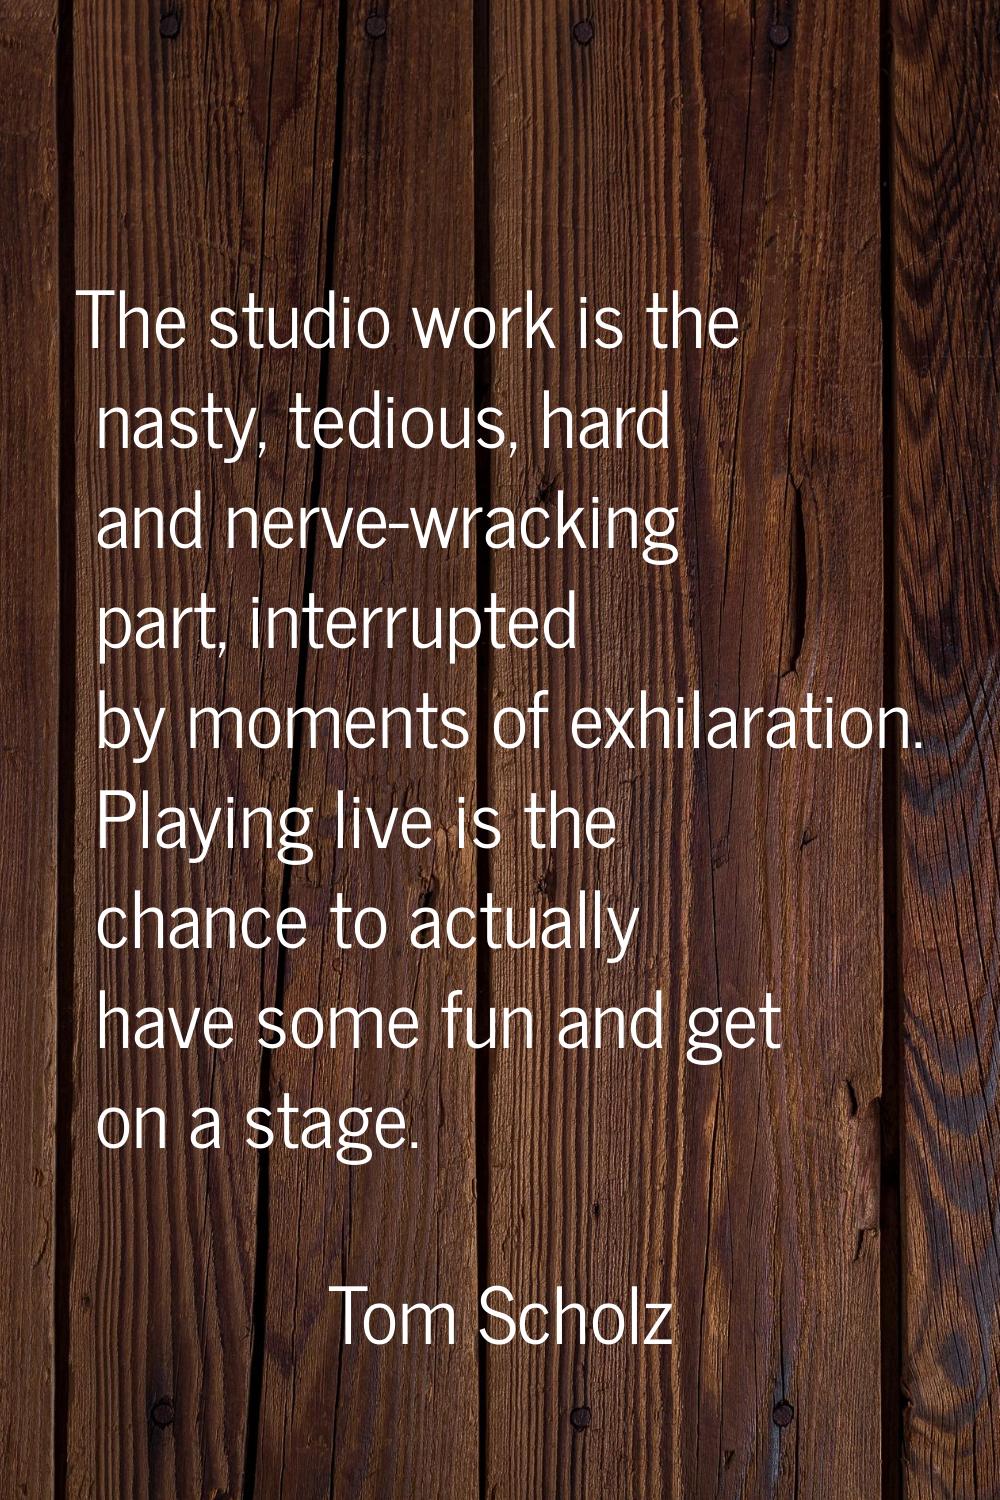 The studio work is the nasty, tedious, hard and nerve-wracking part, interrupted by moments of exhi